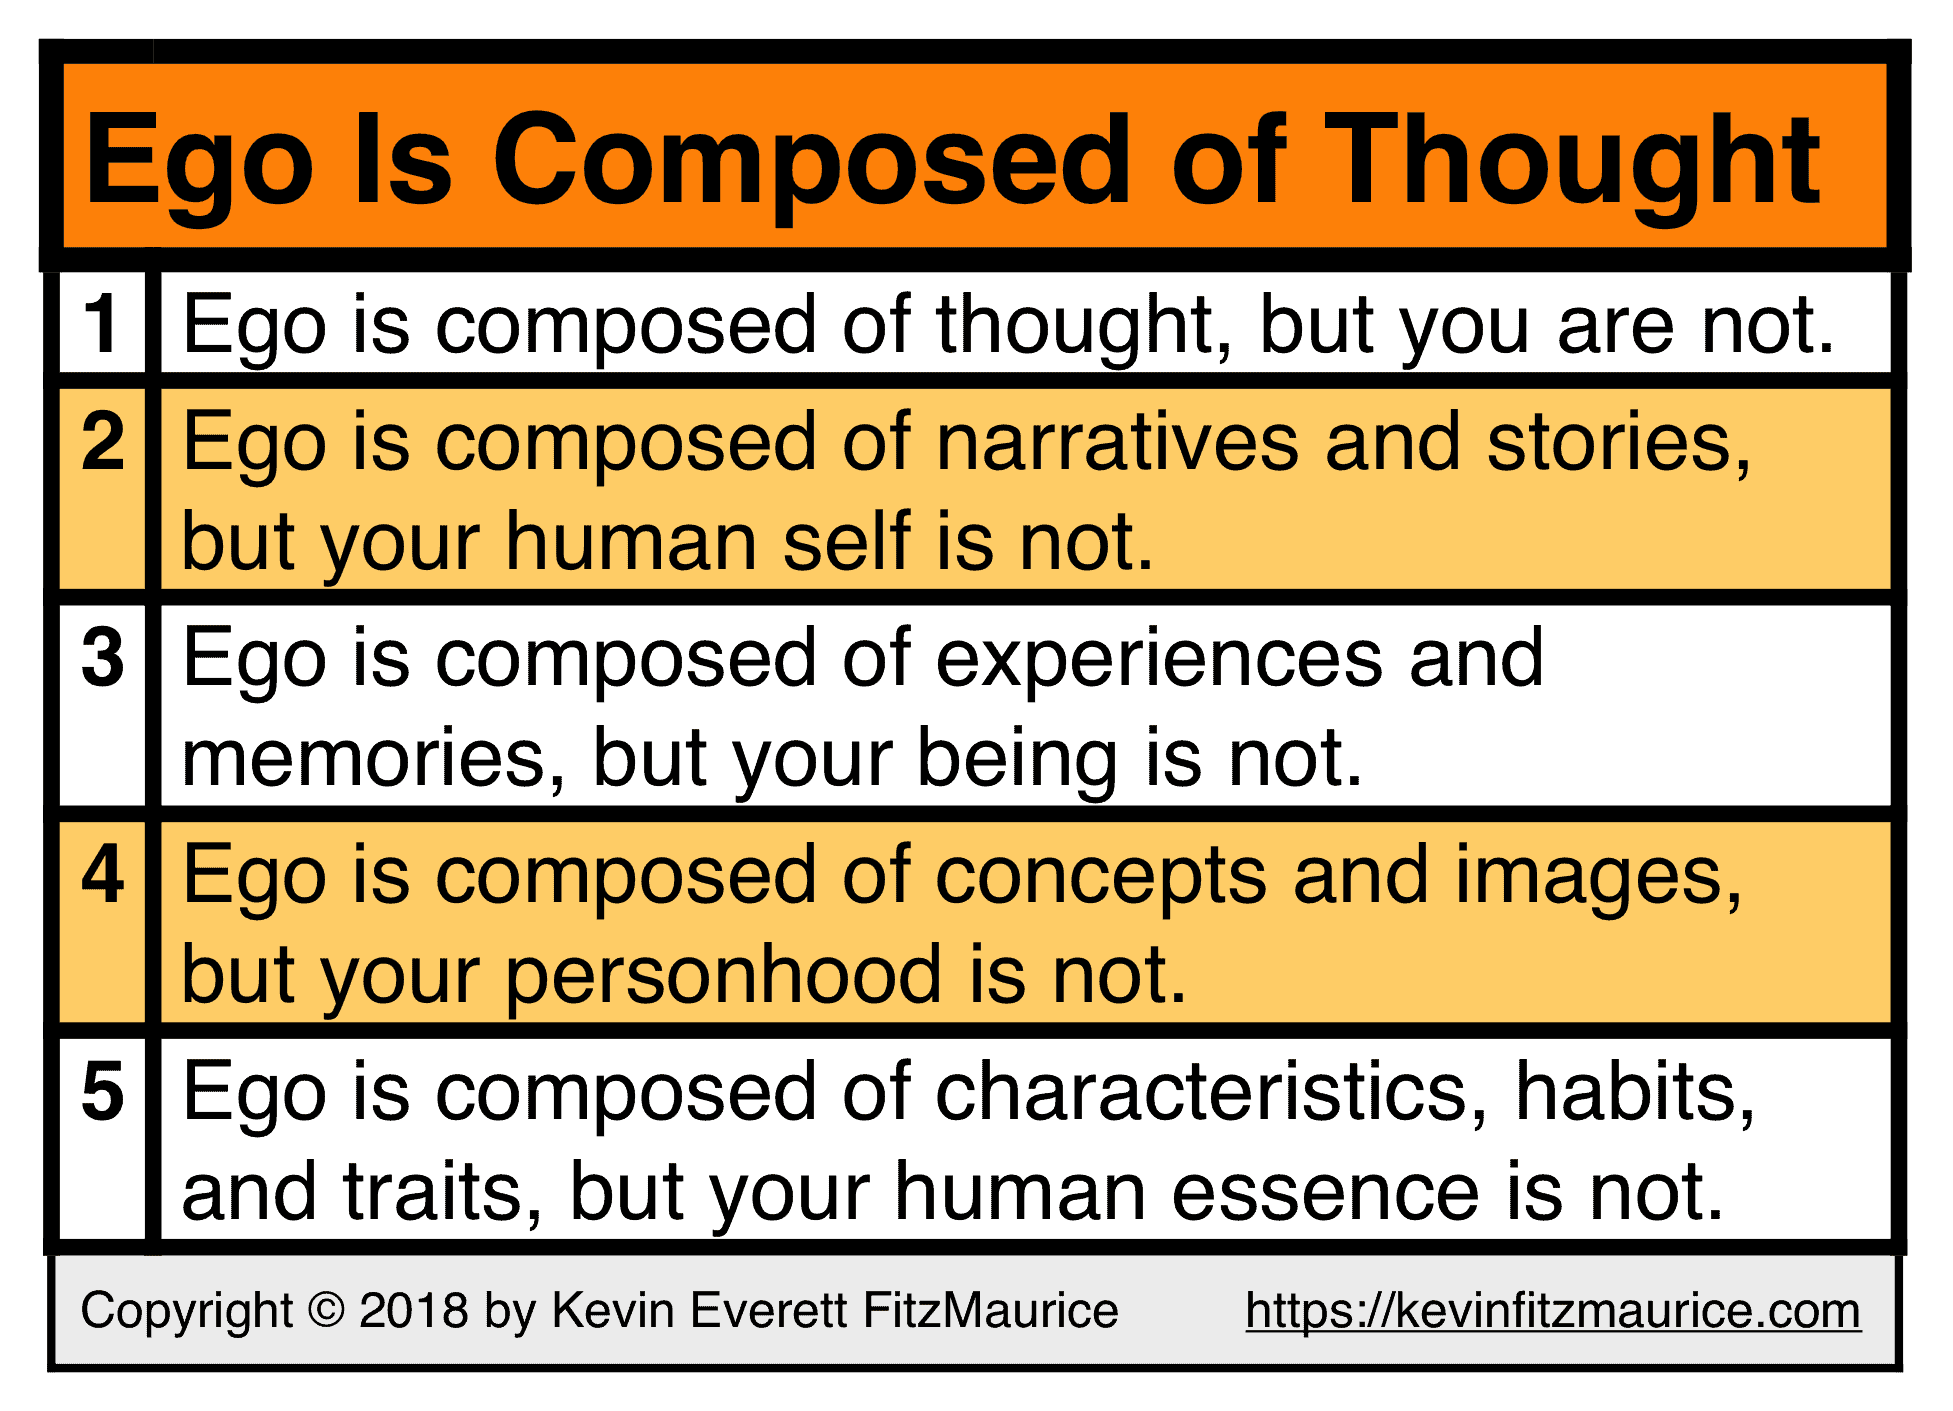 Ego Is Composed of Thought